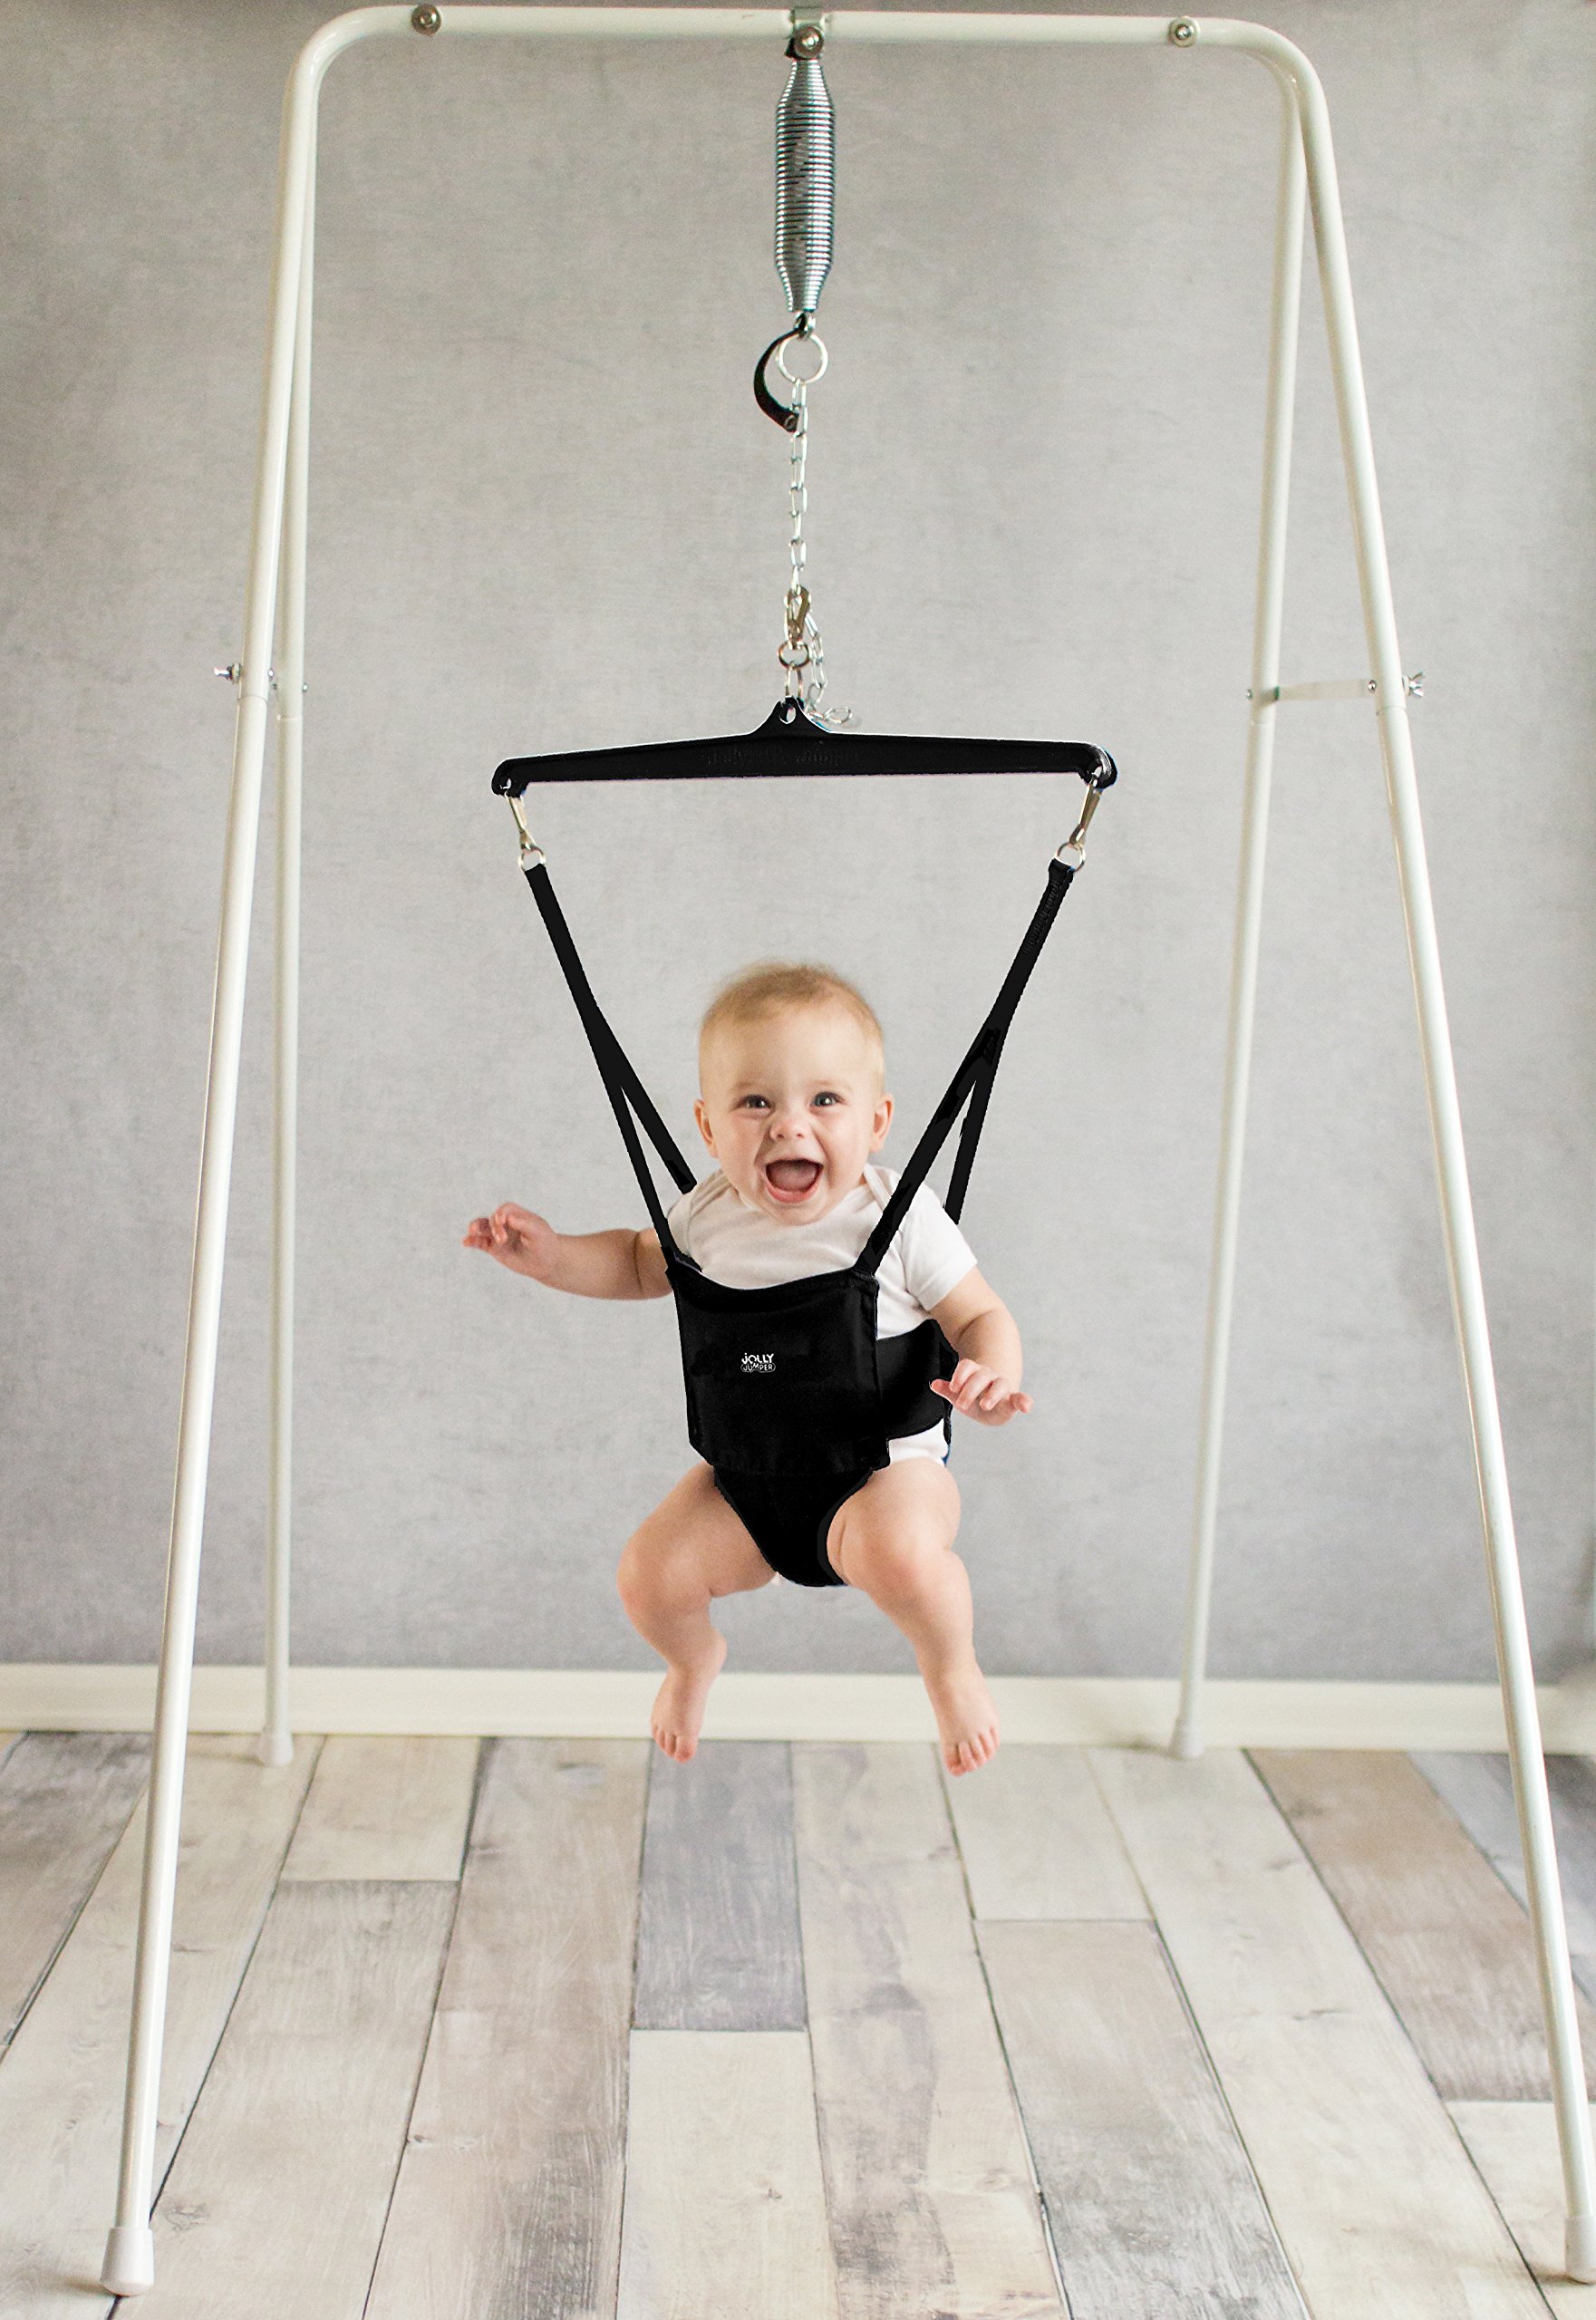 Jolly Jumper **Classic** - Carbon Black Saddle - The Original Jolly Jumper with Stand. Trusted by Parents to Provide Fun for Babies and to Create Cherished Memories for Families for Over 75 Years.